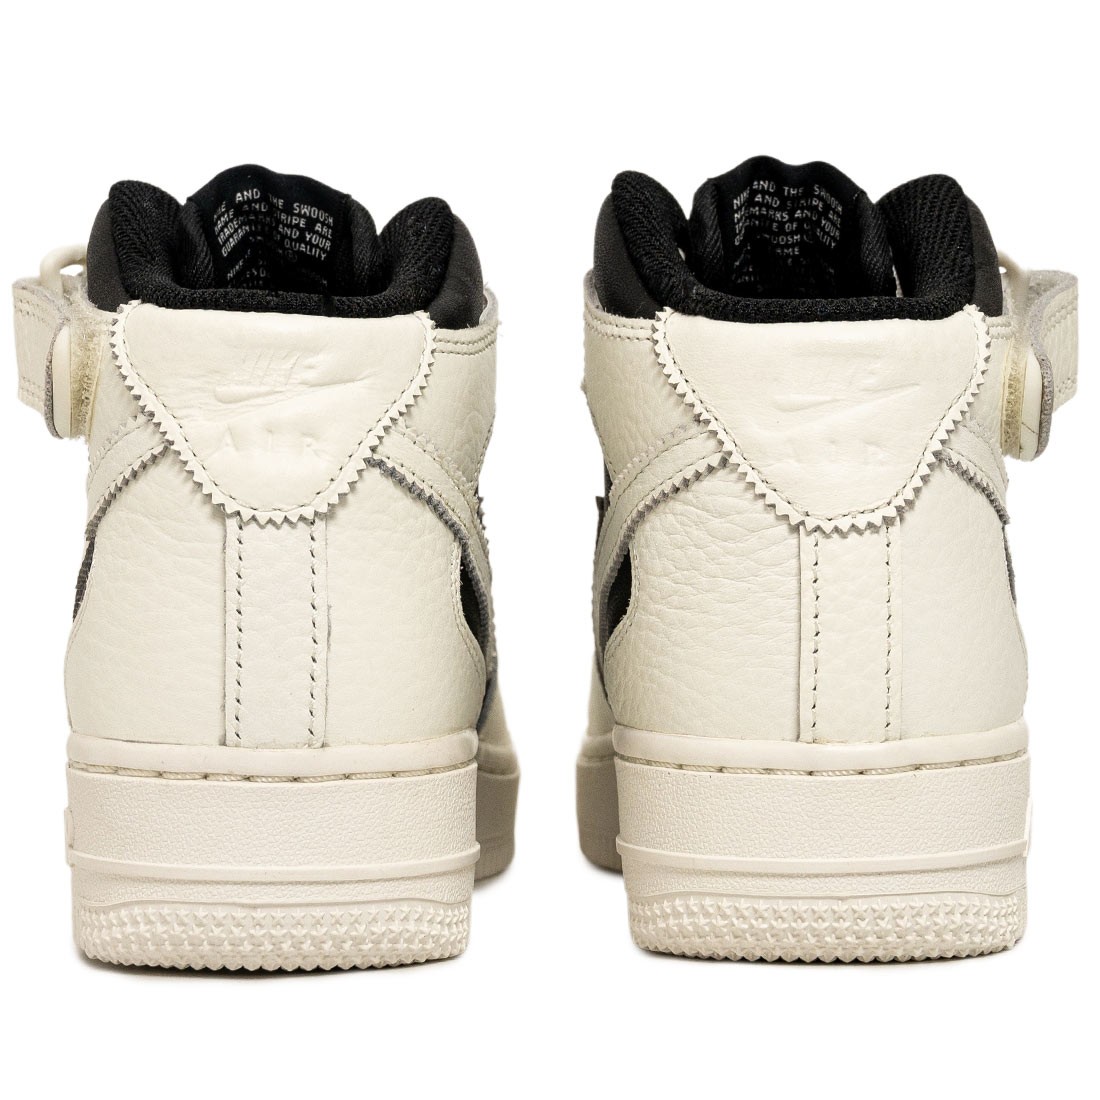 Nike Air Force 1 Mid '07 Lv8 'Black/Coconut Milk-Light Silver' The radiance  lives on in the Nike Air Force 1 '07, the b-ball OG that puts…